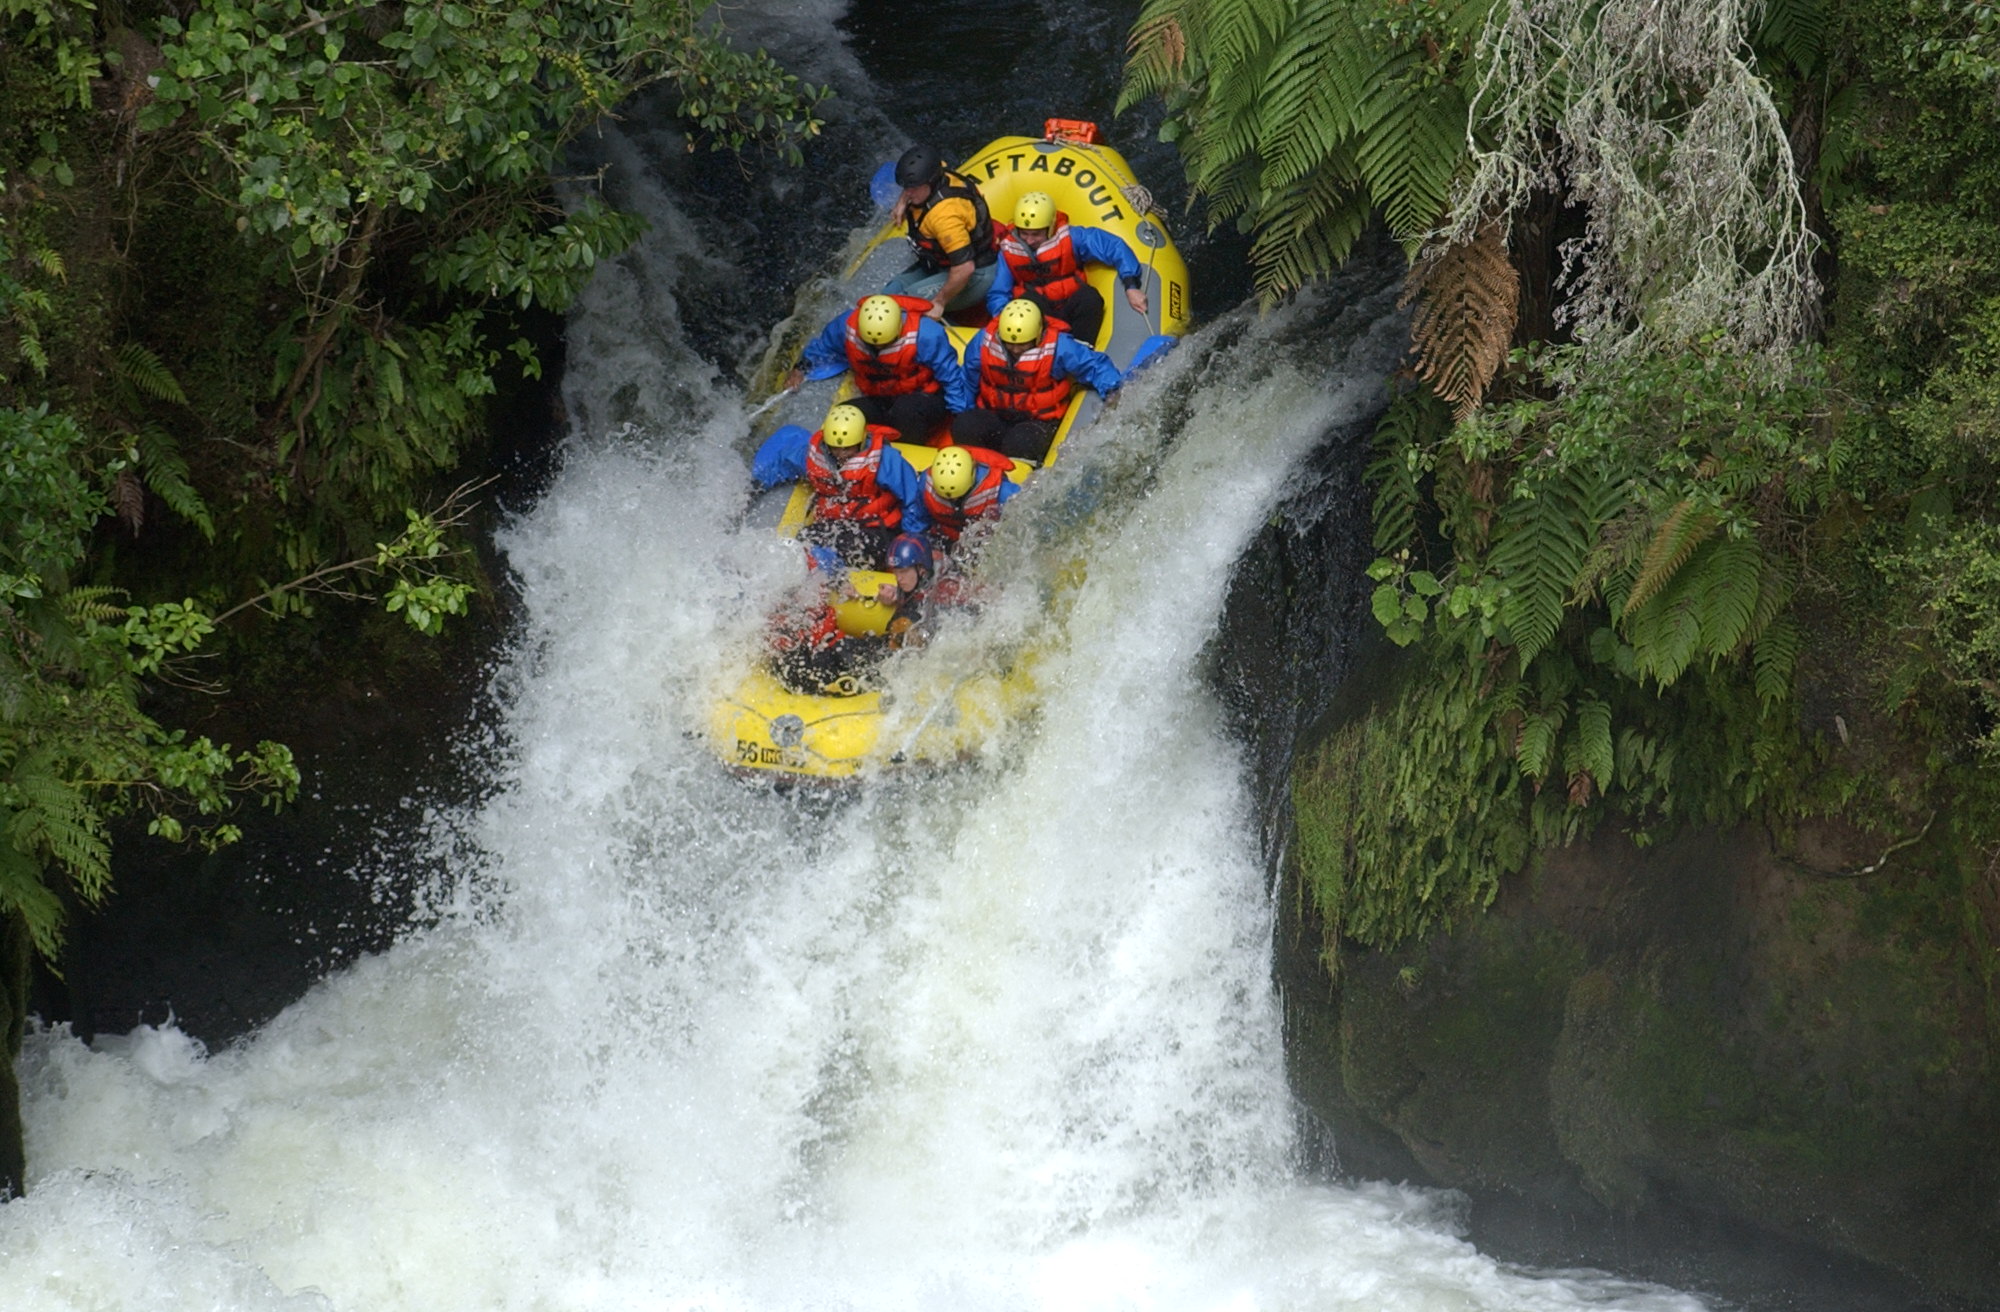 Image Credit : http://www.raftabout.co.nz/white-water-rafting/kaituna-waterfall